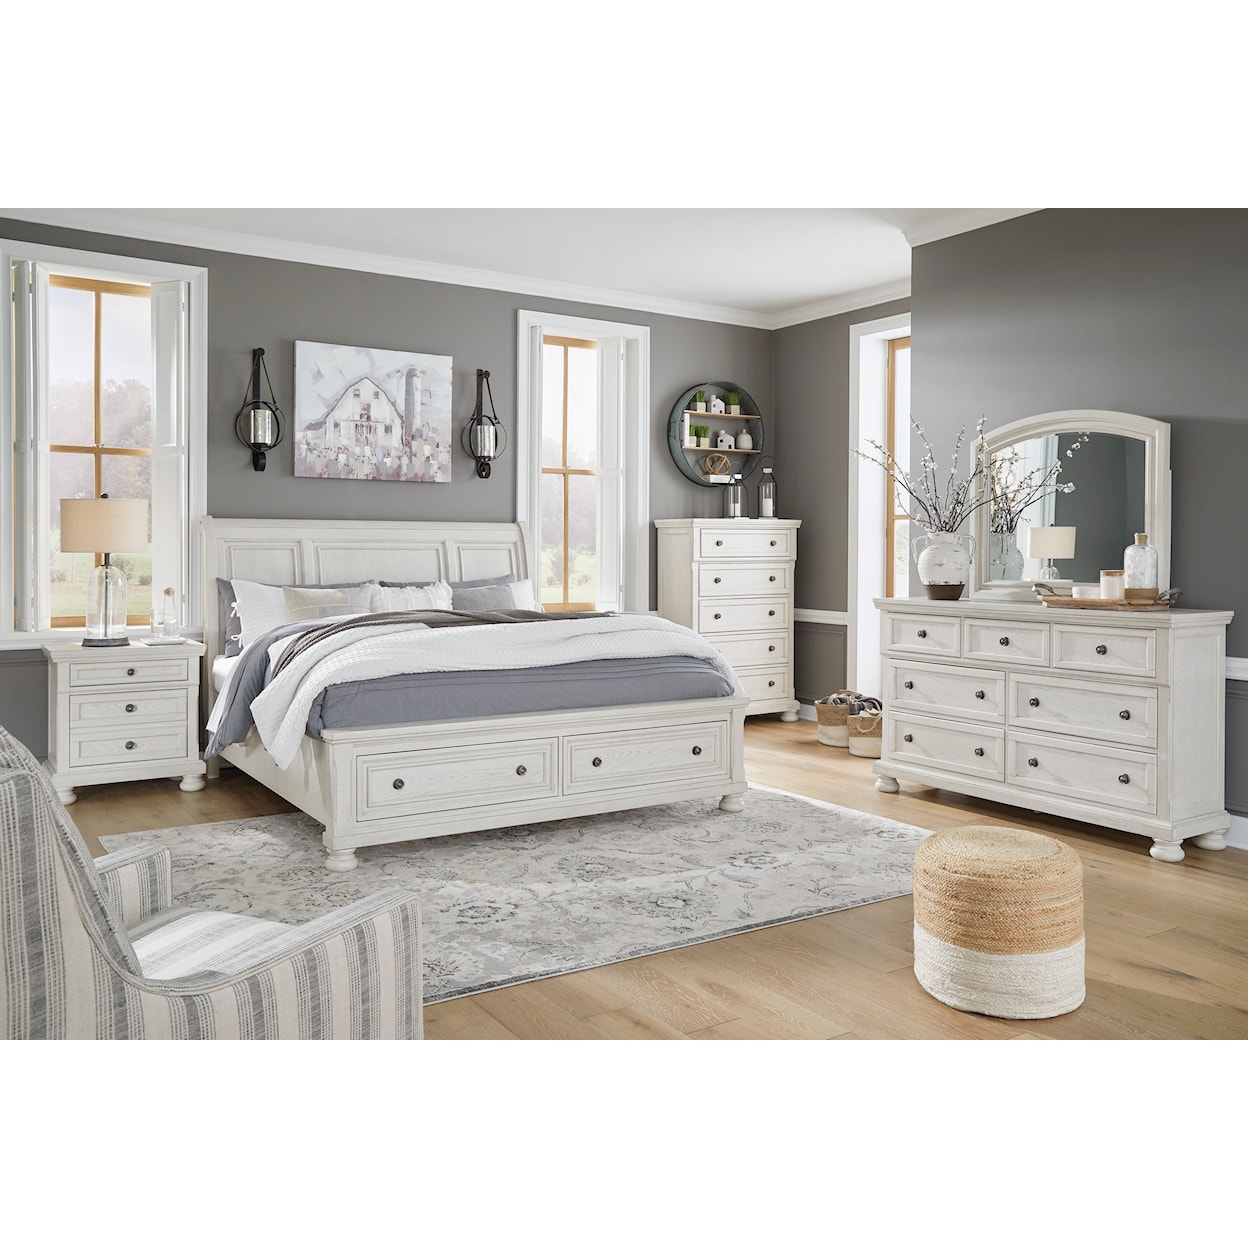 Signature Design by Ashley Robbinsdale 5 Piece King Bedroom Set